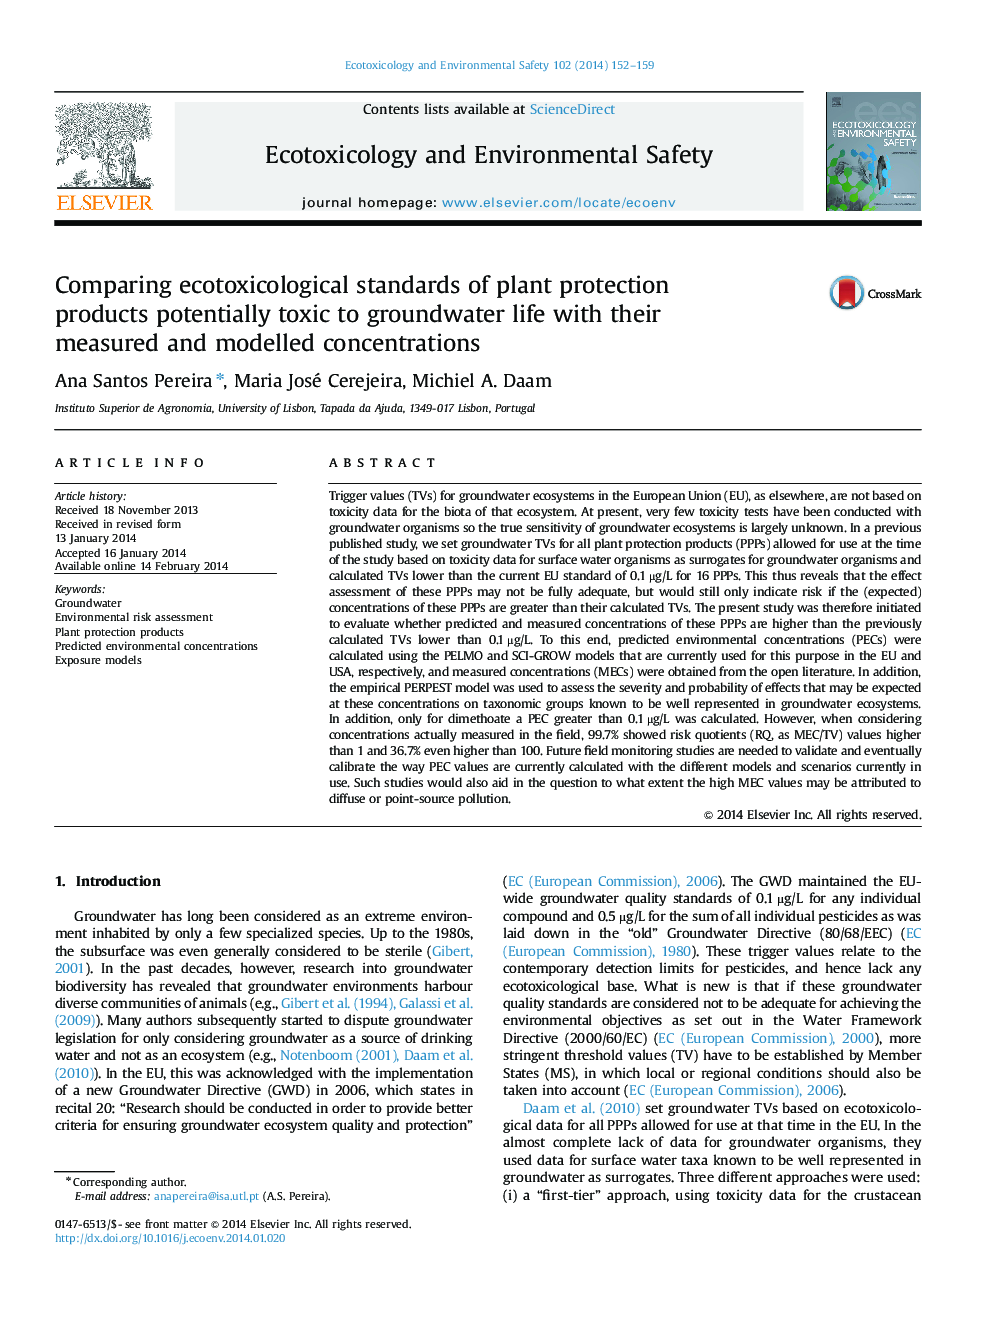 Comparing ecotoxicological standards of plant protection products potentially toxic to groundwater life with their measured and modelled concentrations